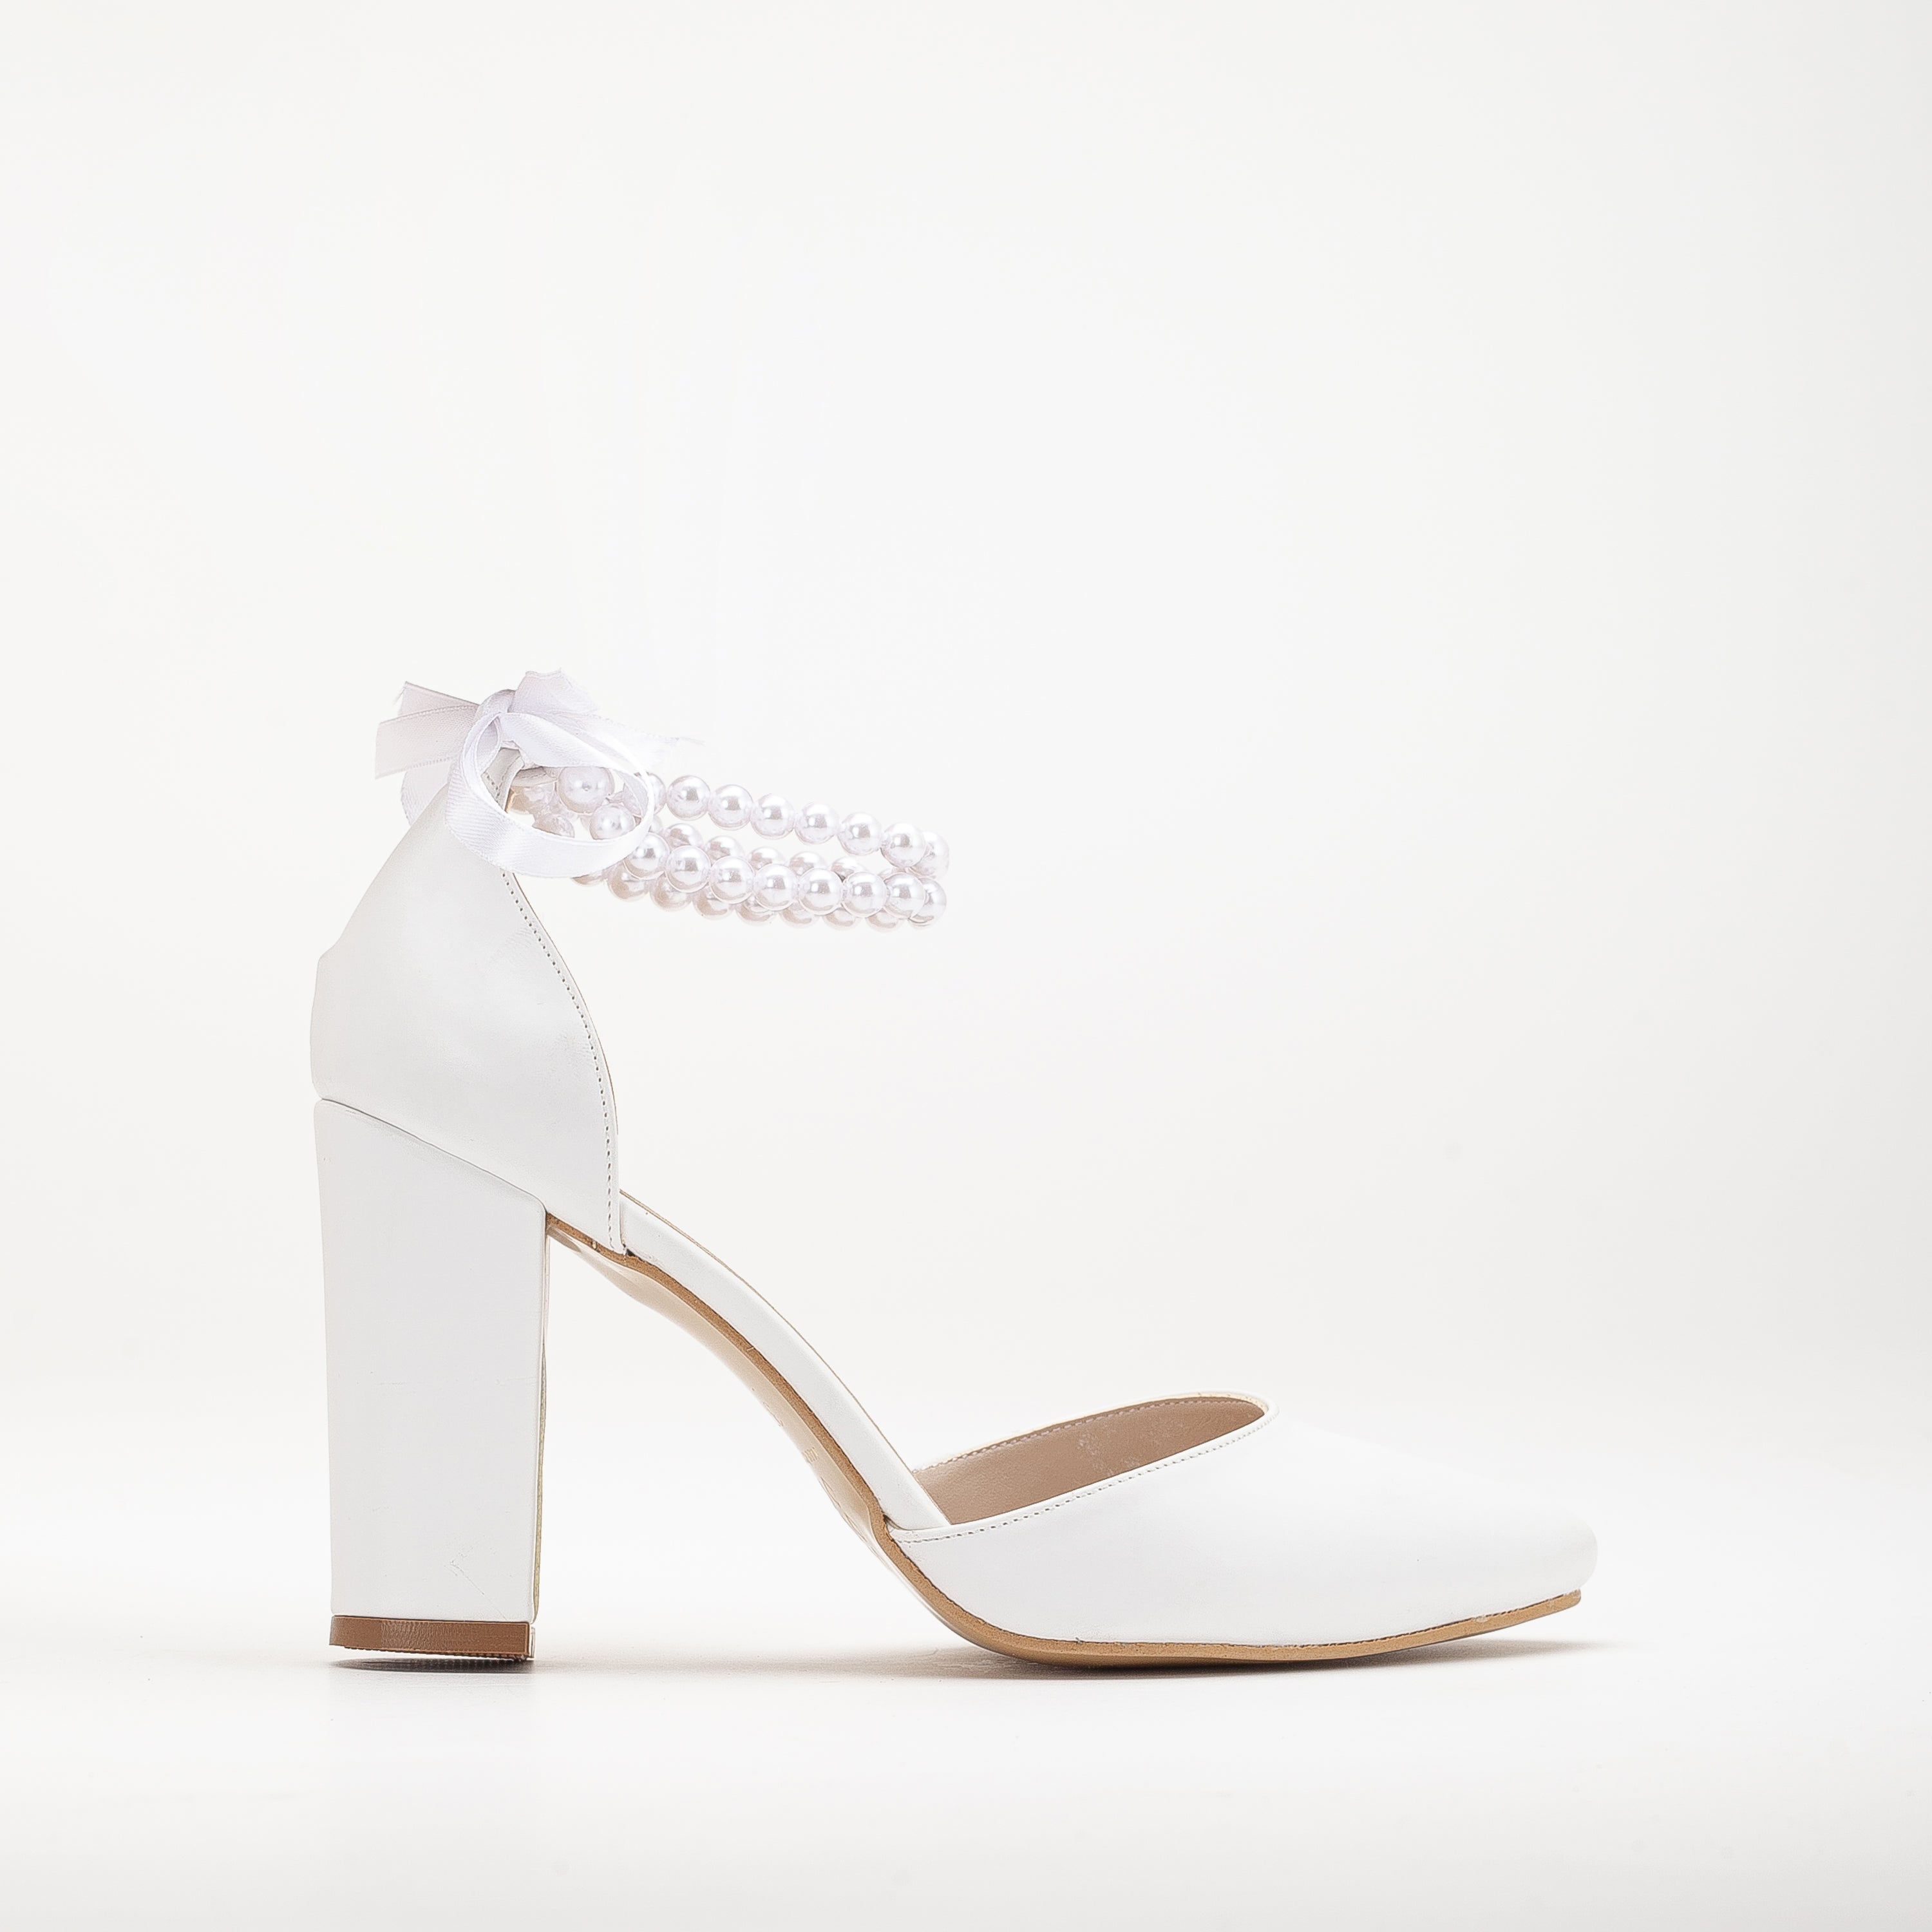 Denise - White Wedding Heels with Pearls